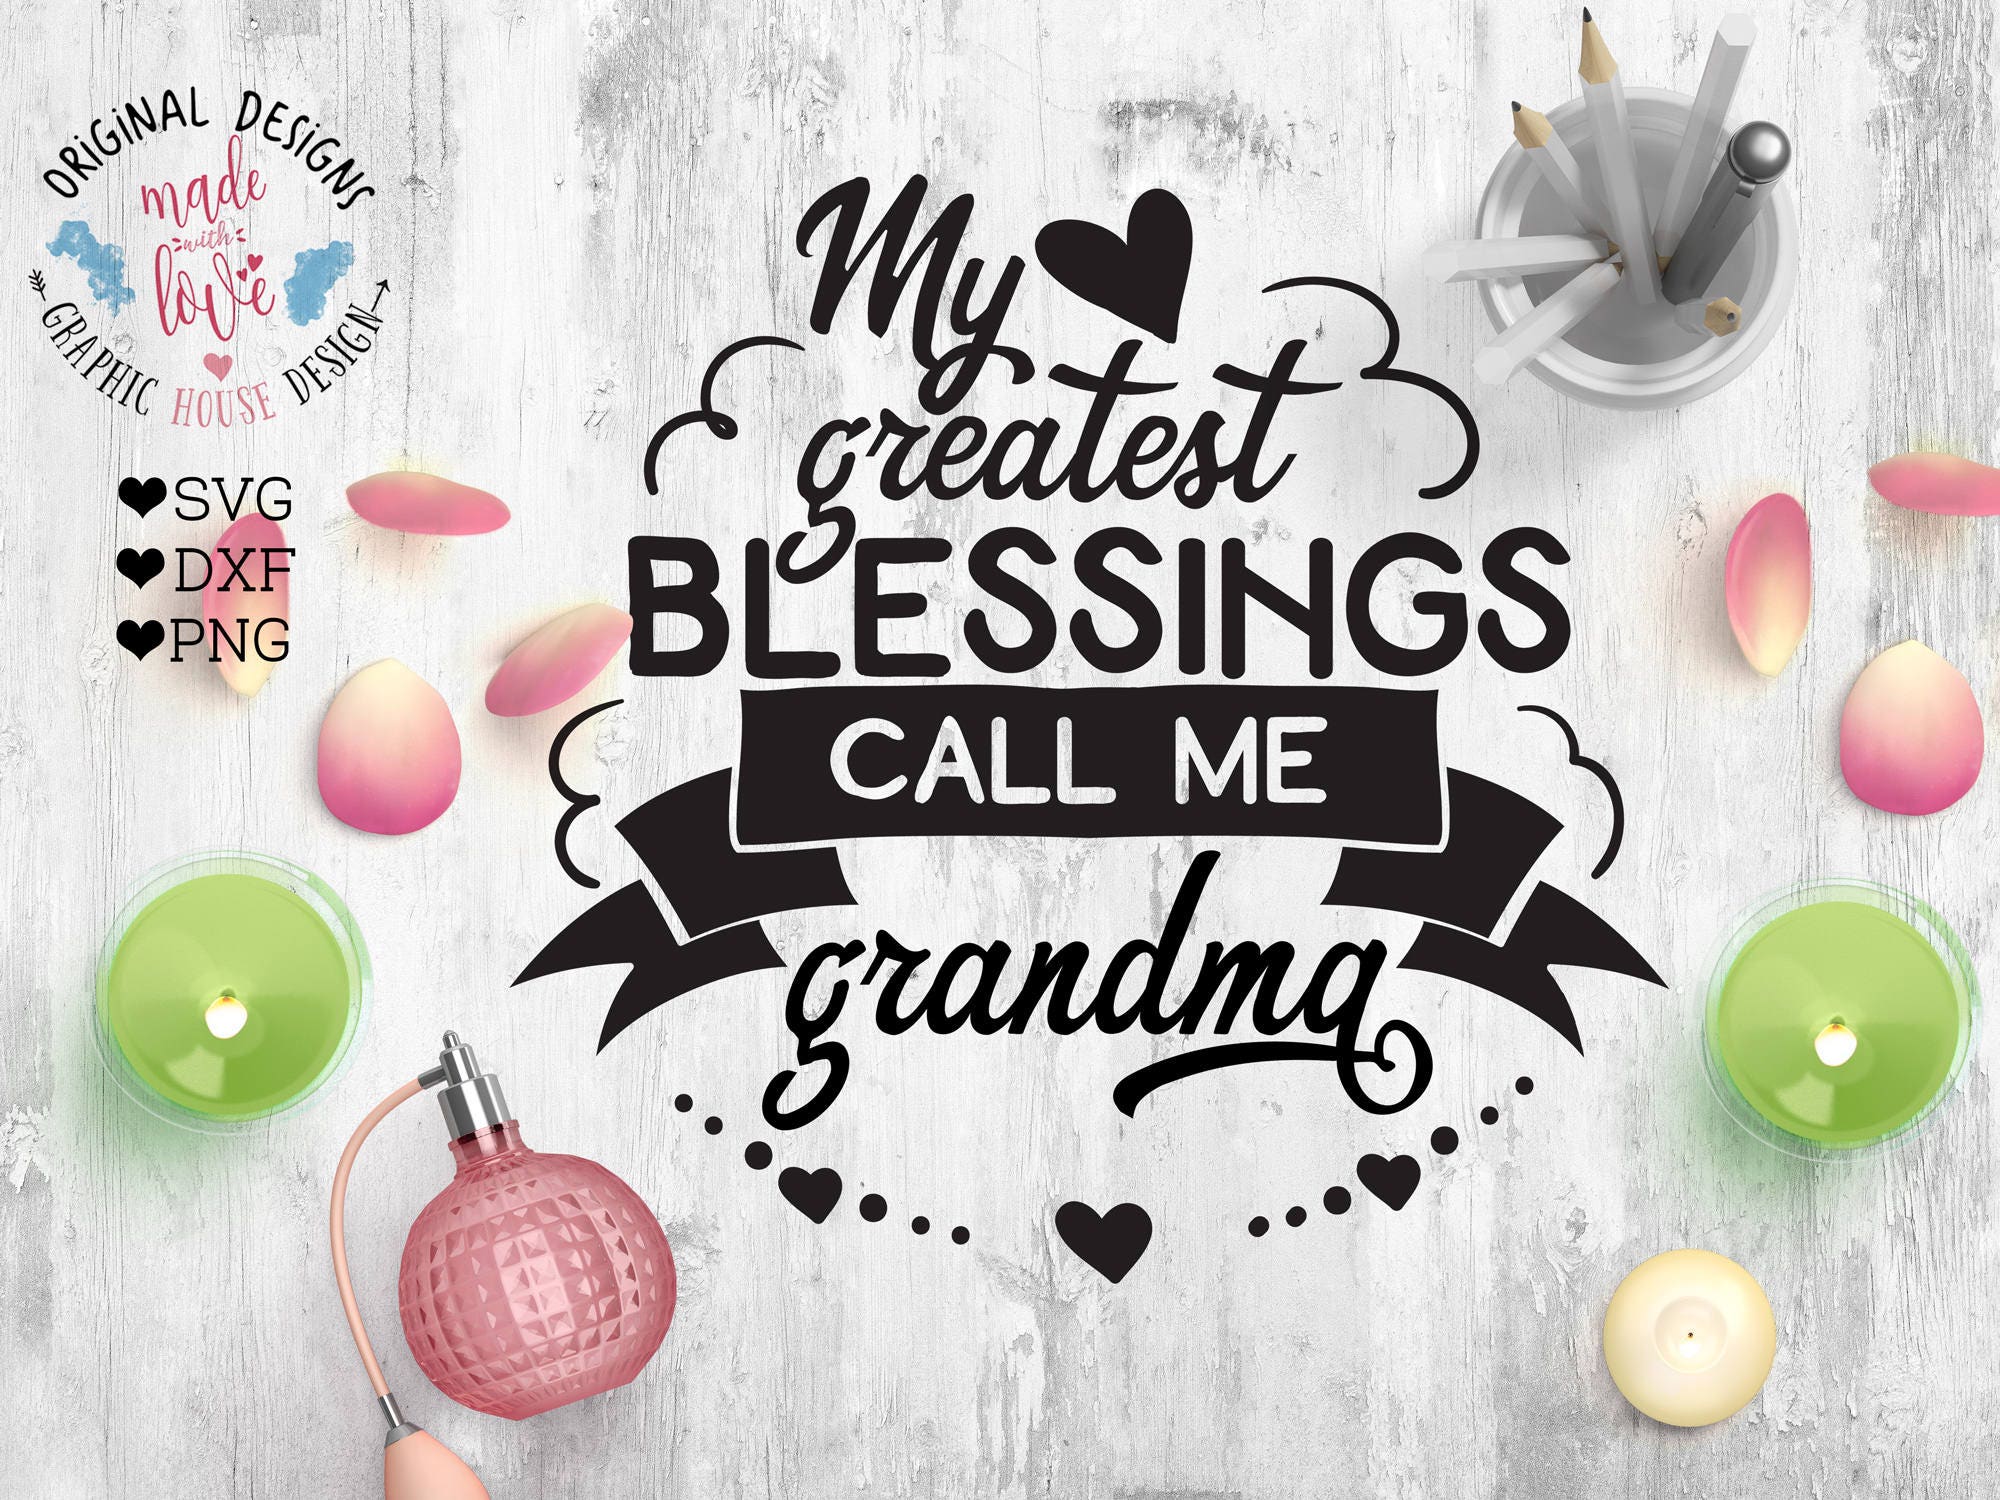 Download Μy greatest blessings call me grandma Cut File in SVG DXF PNG